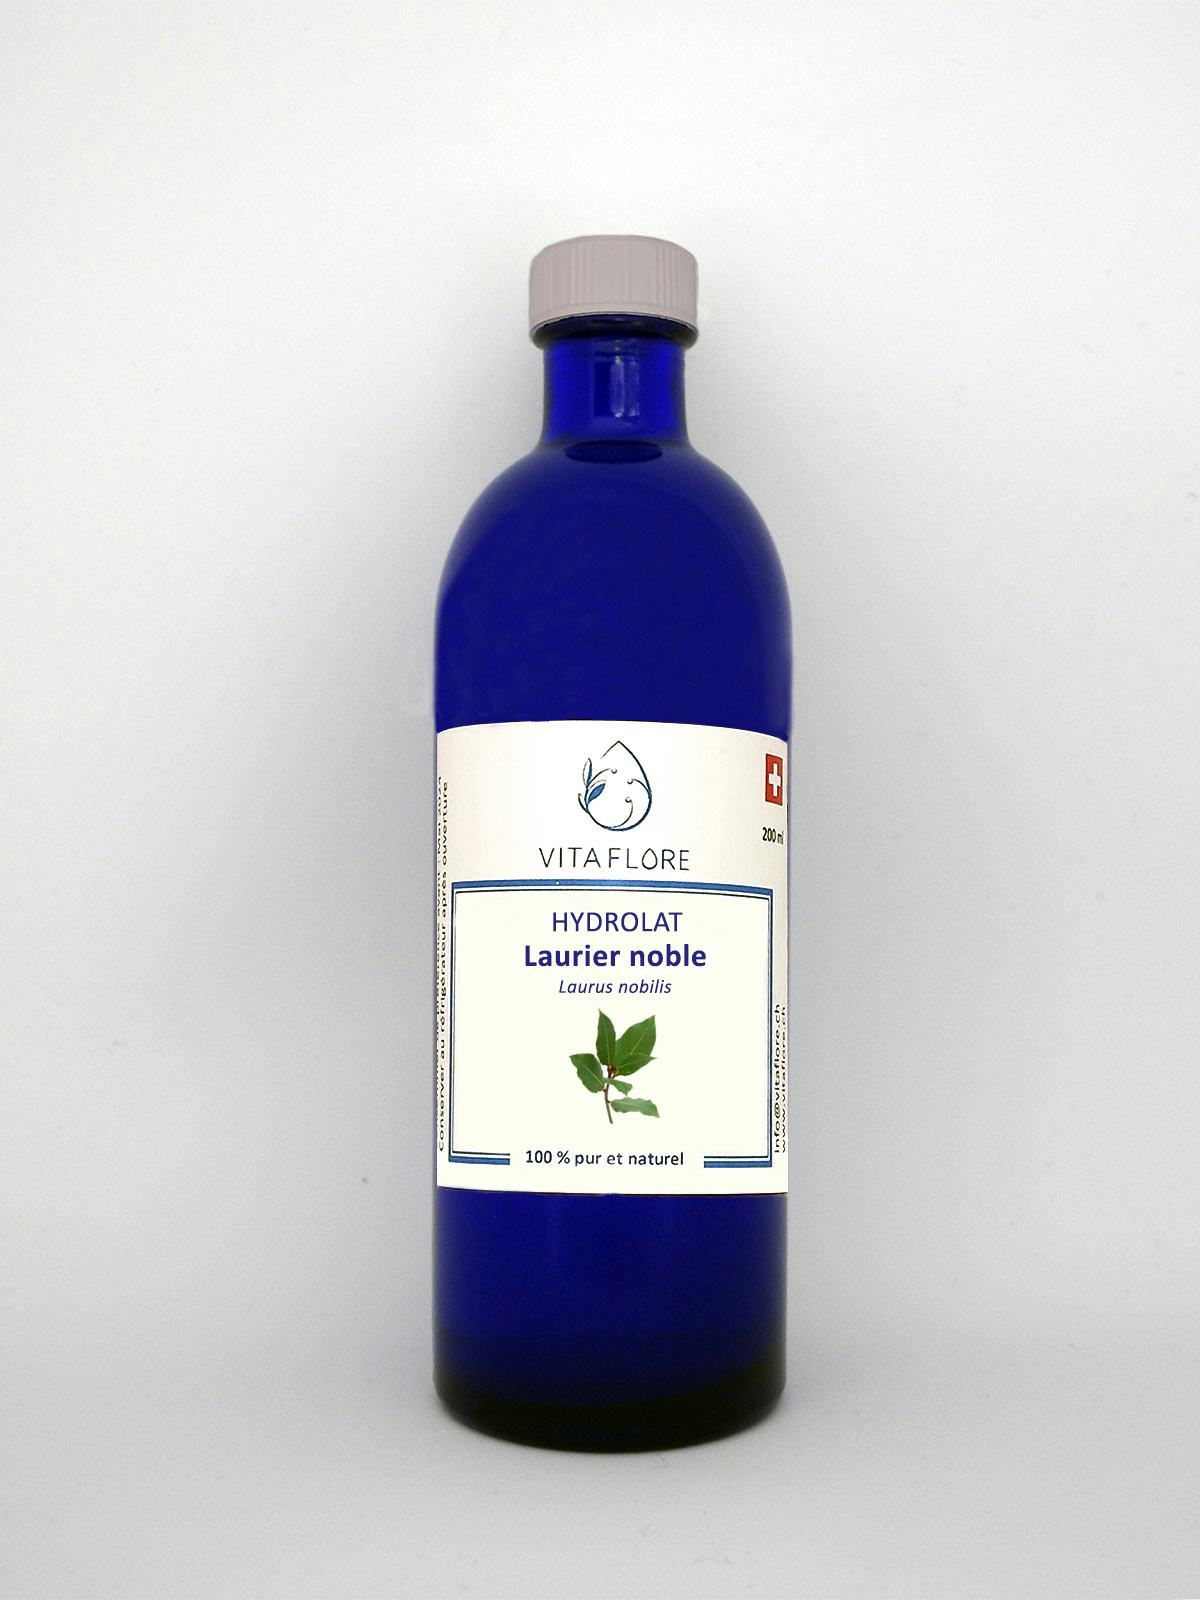 Noble laurel hydrosol, artisanal product for direct sale in Switzerland